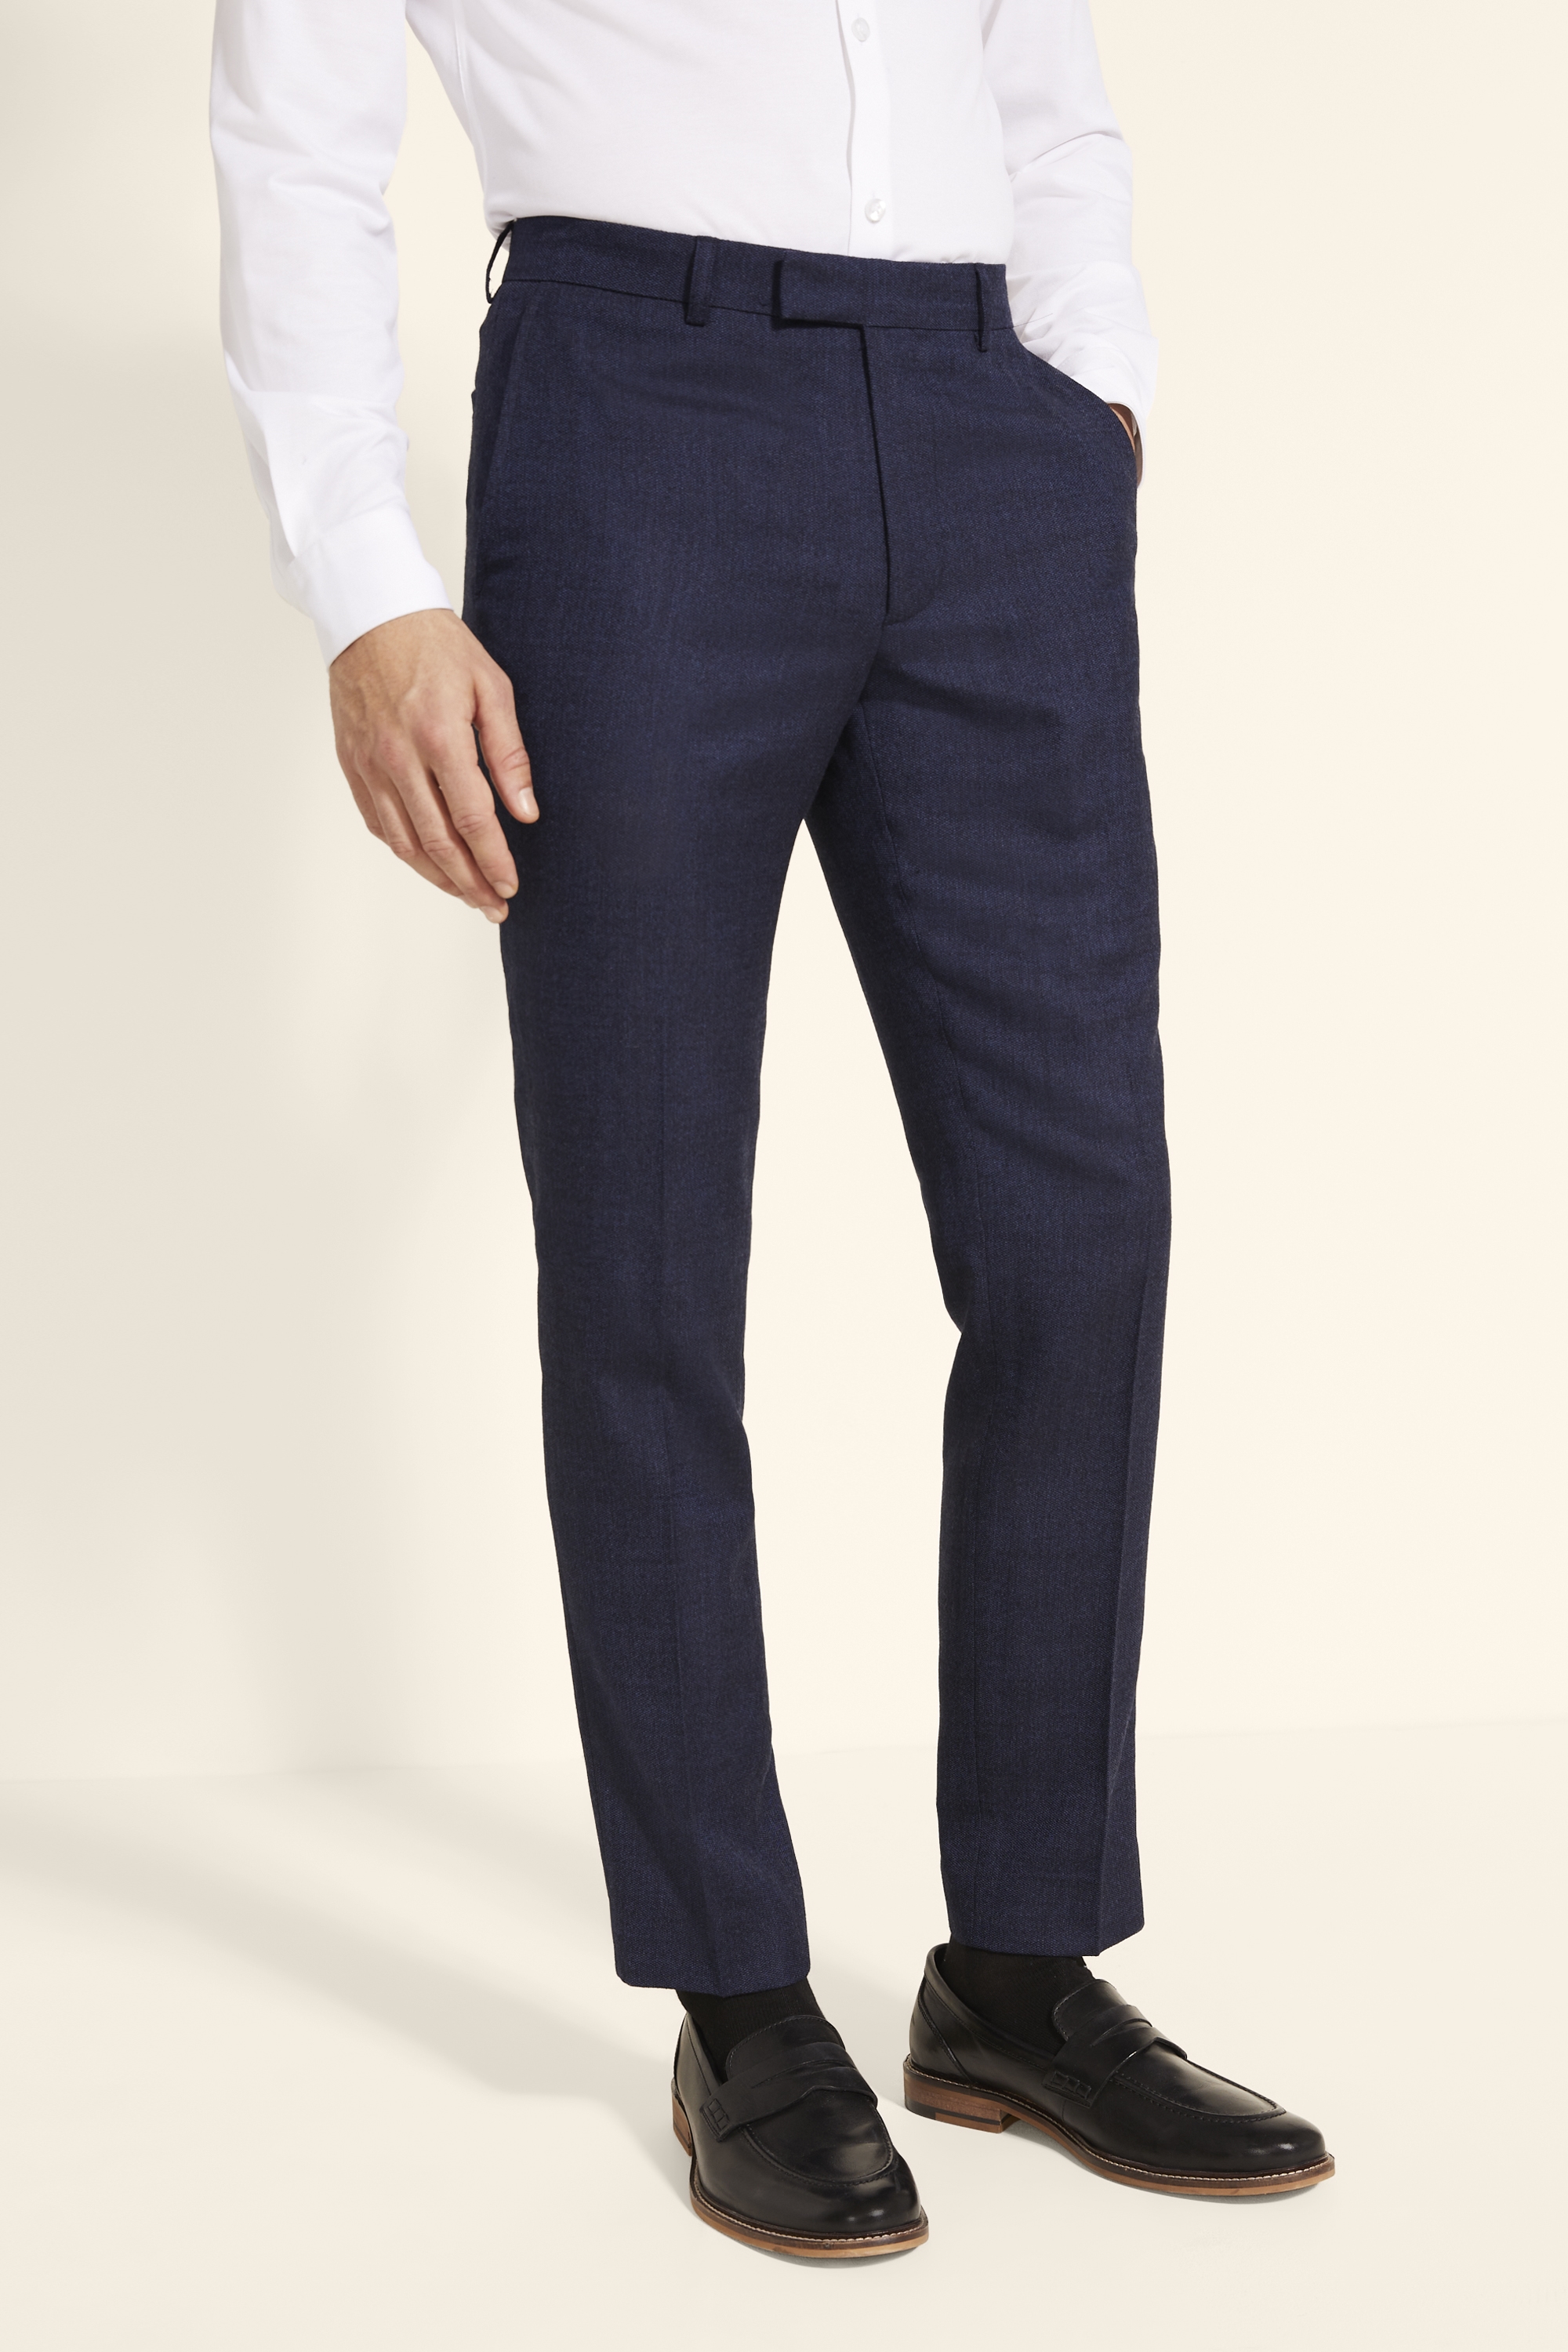 Slim Fit Blue Flannel Trouser | Buy Online at Moss